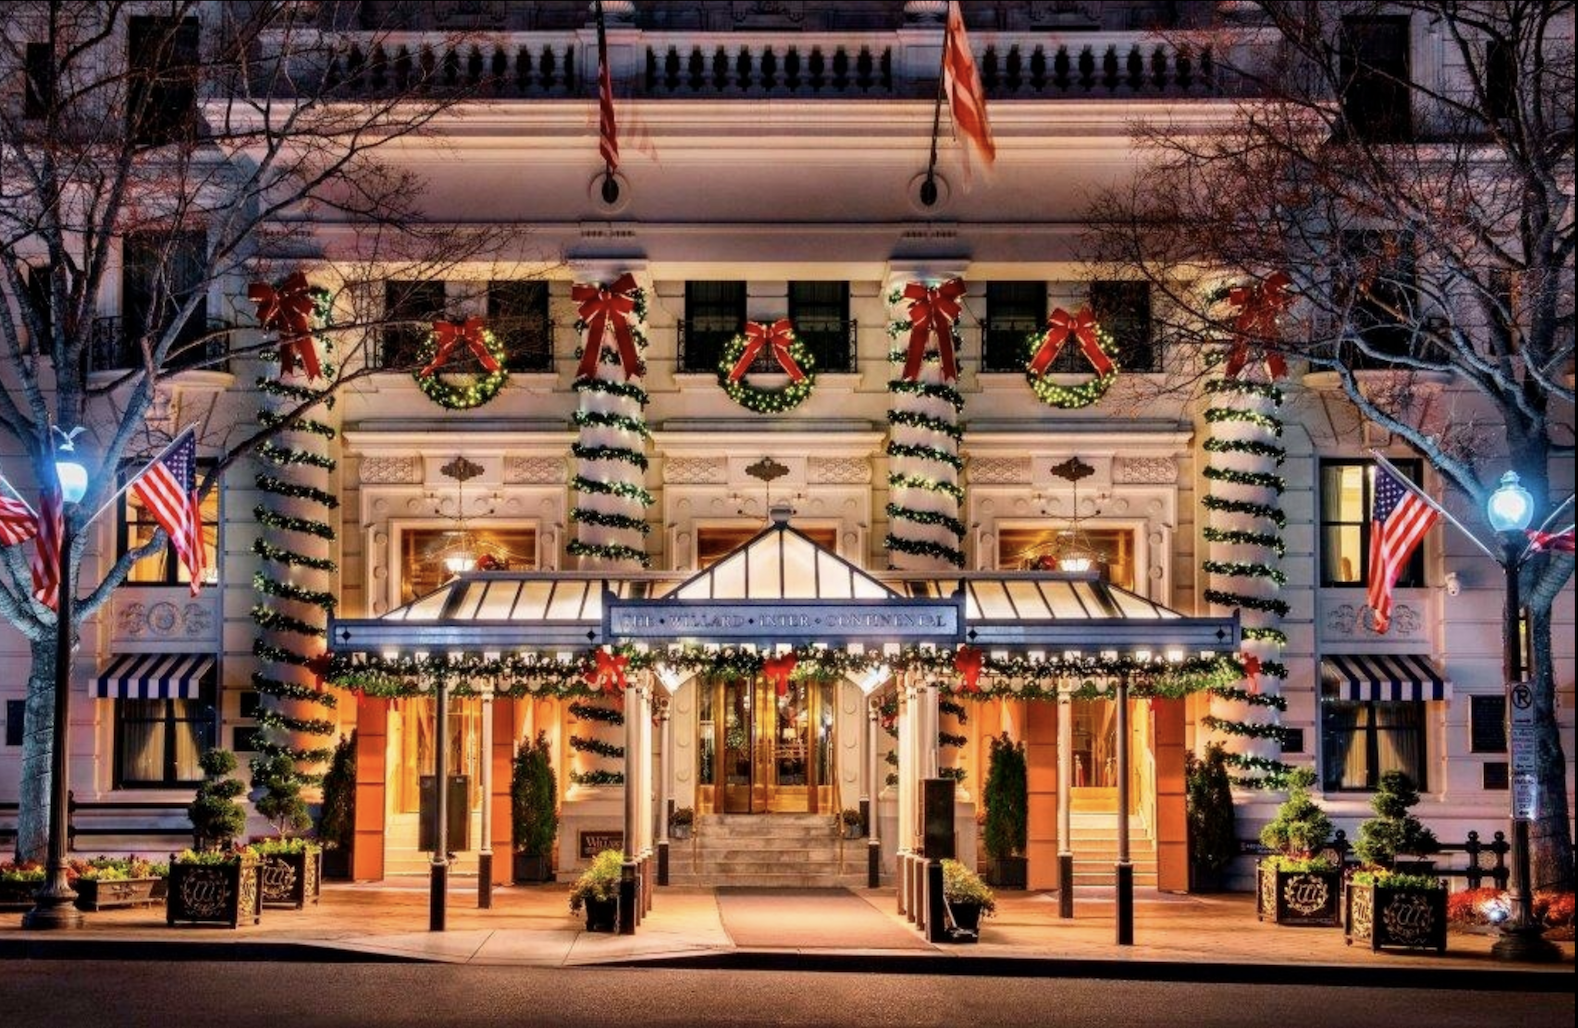 Willard Hotel front decorated with wreaths